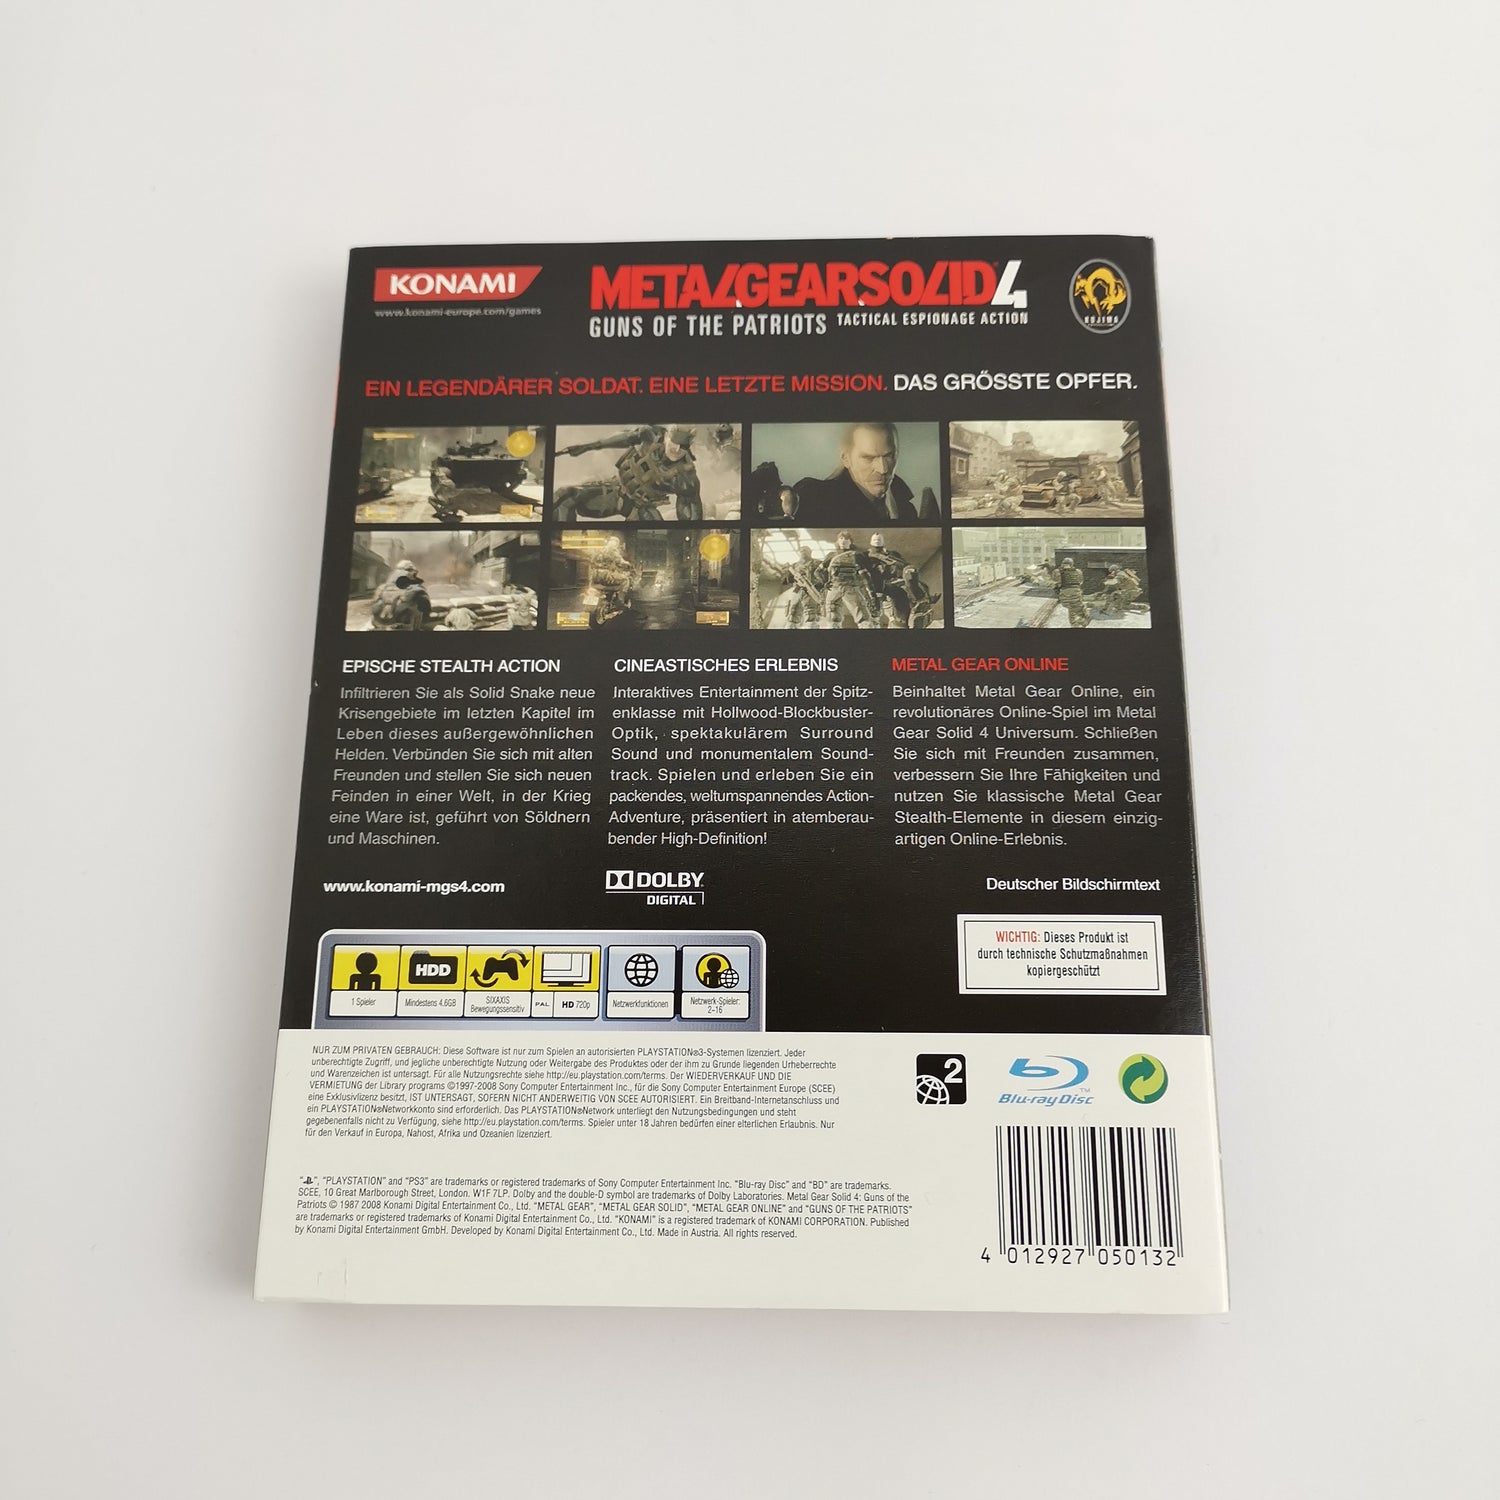 Sony Playstation 3 Game: Metal Gear Solid Guns of the Patriots | PS3 original packaging USK18